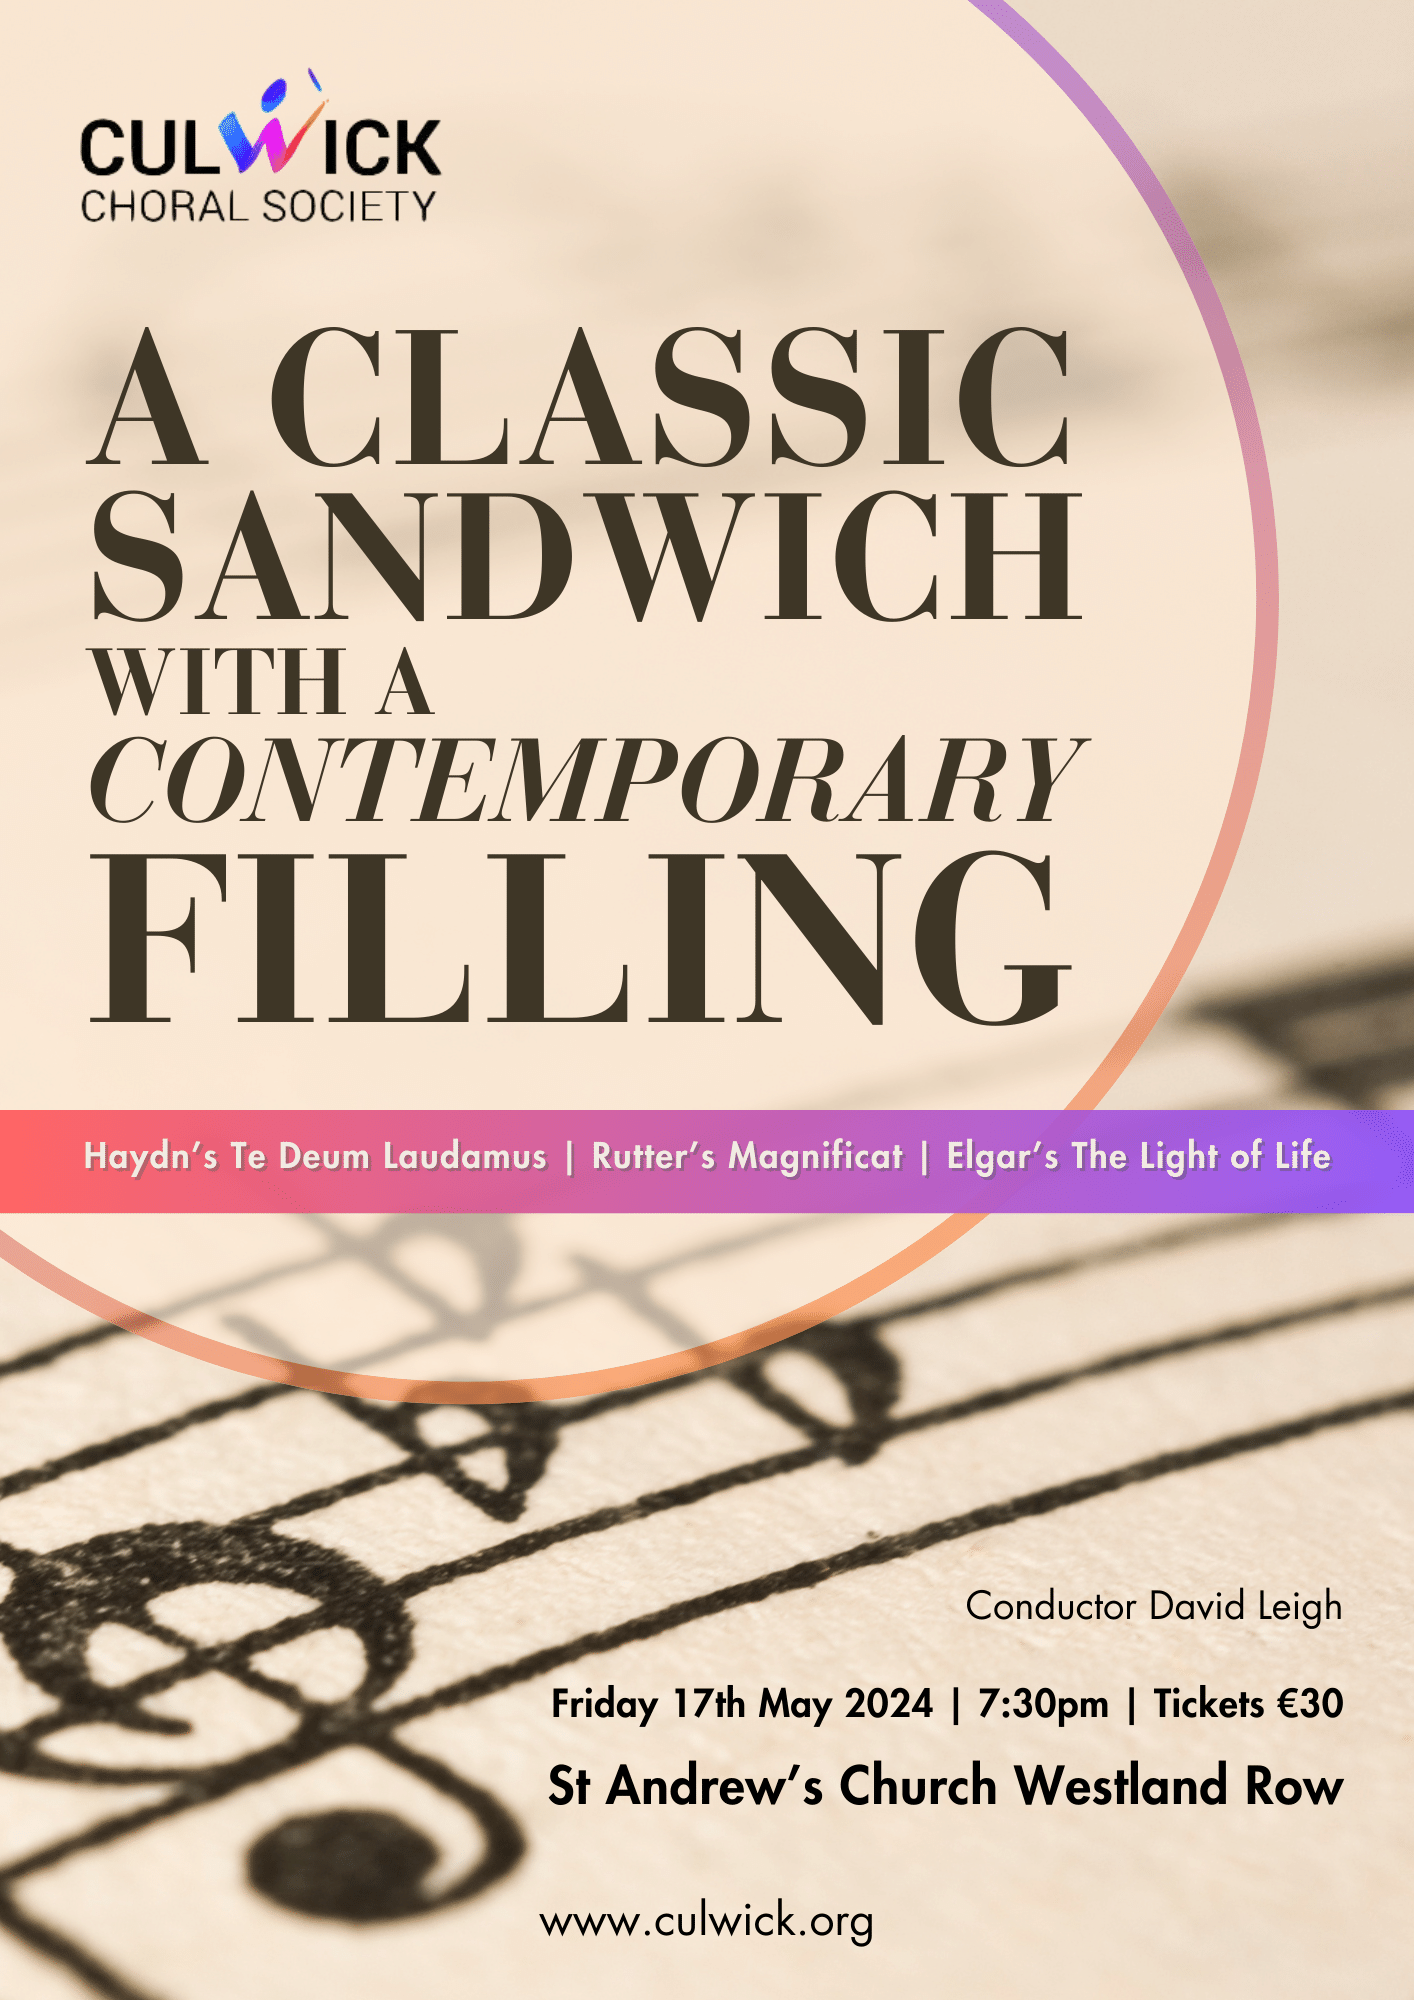 Culwick Choral Society: A Classic Sandwich with a Contemporary Filling